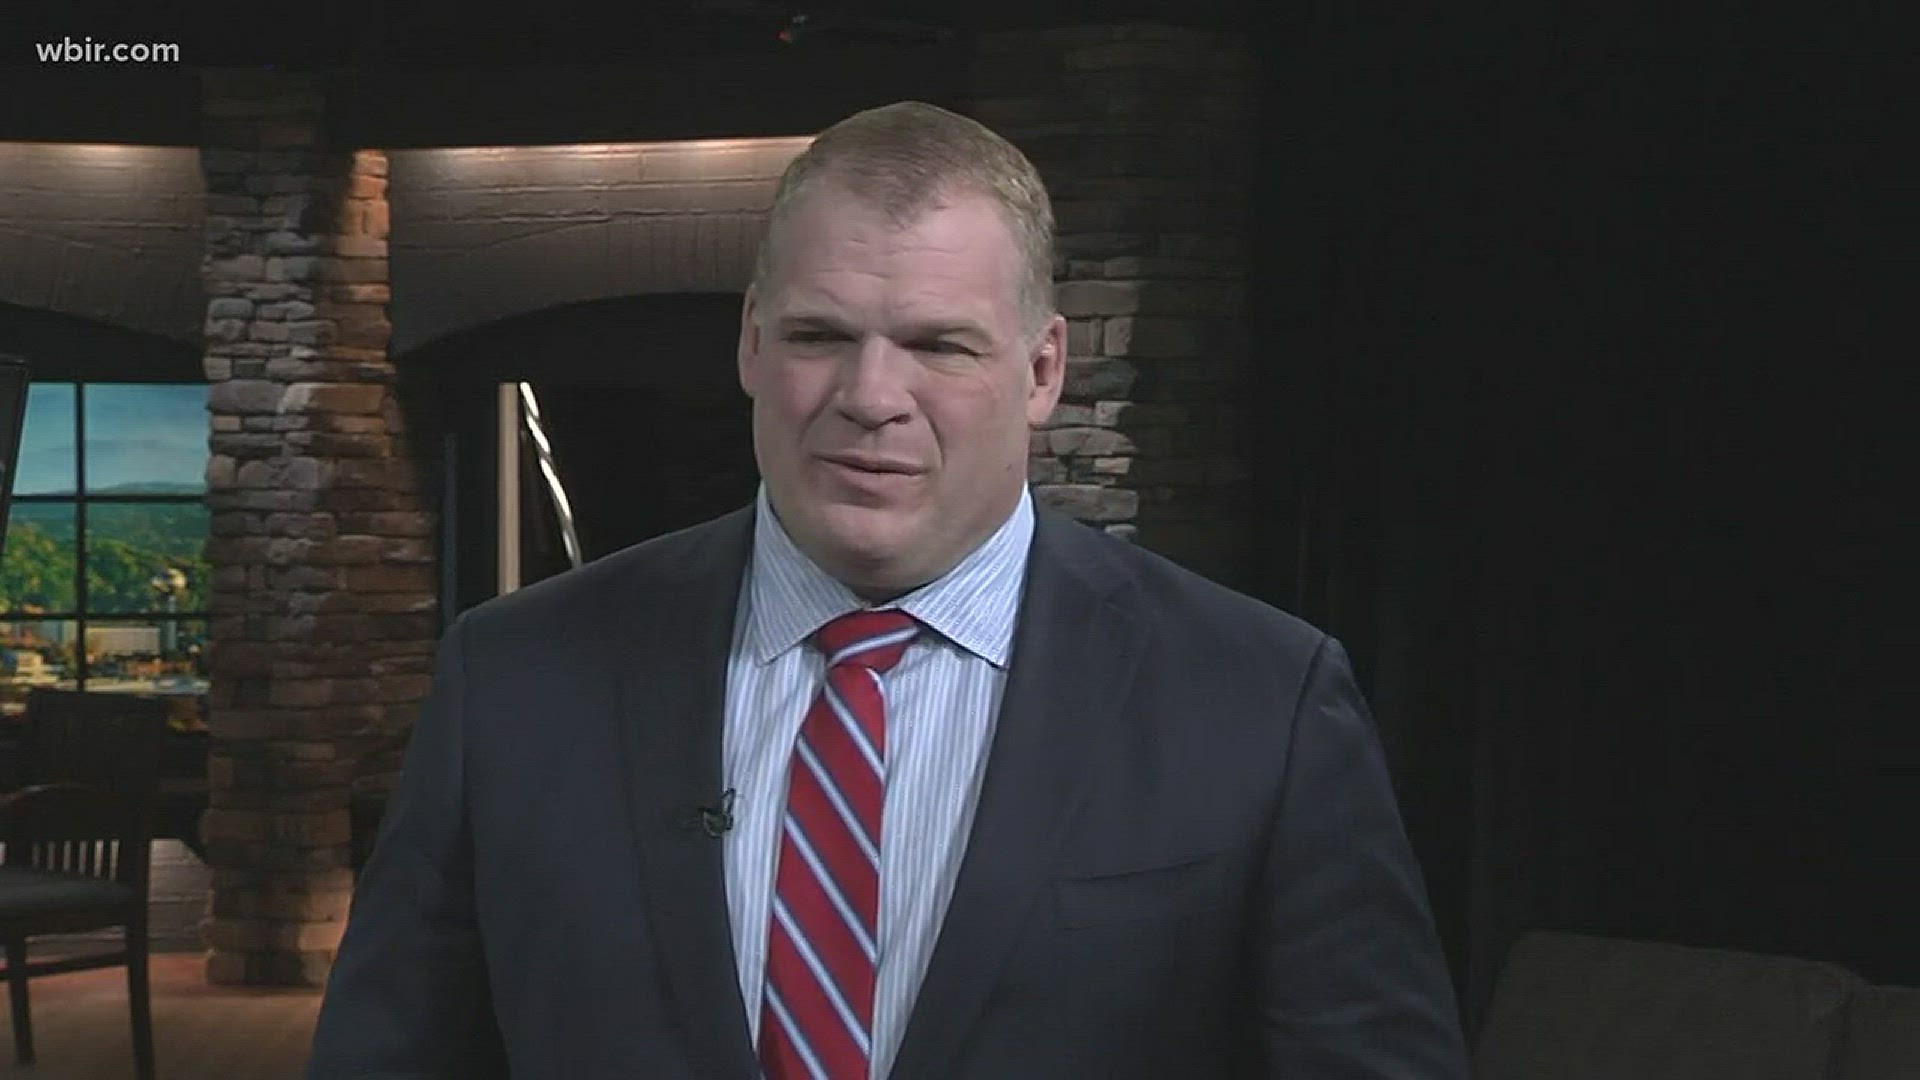 Feb. 8, 2018: Knox County mayoral candidate Glenn Jacobs talks about the county's debt service and taxes.